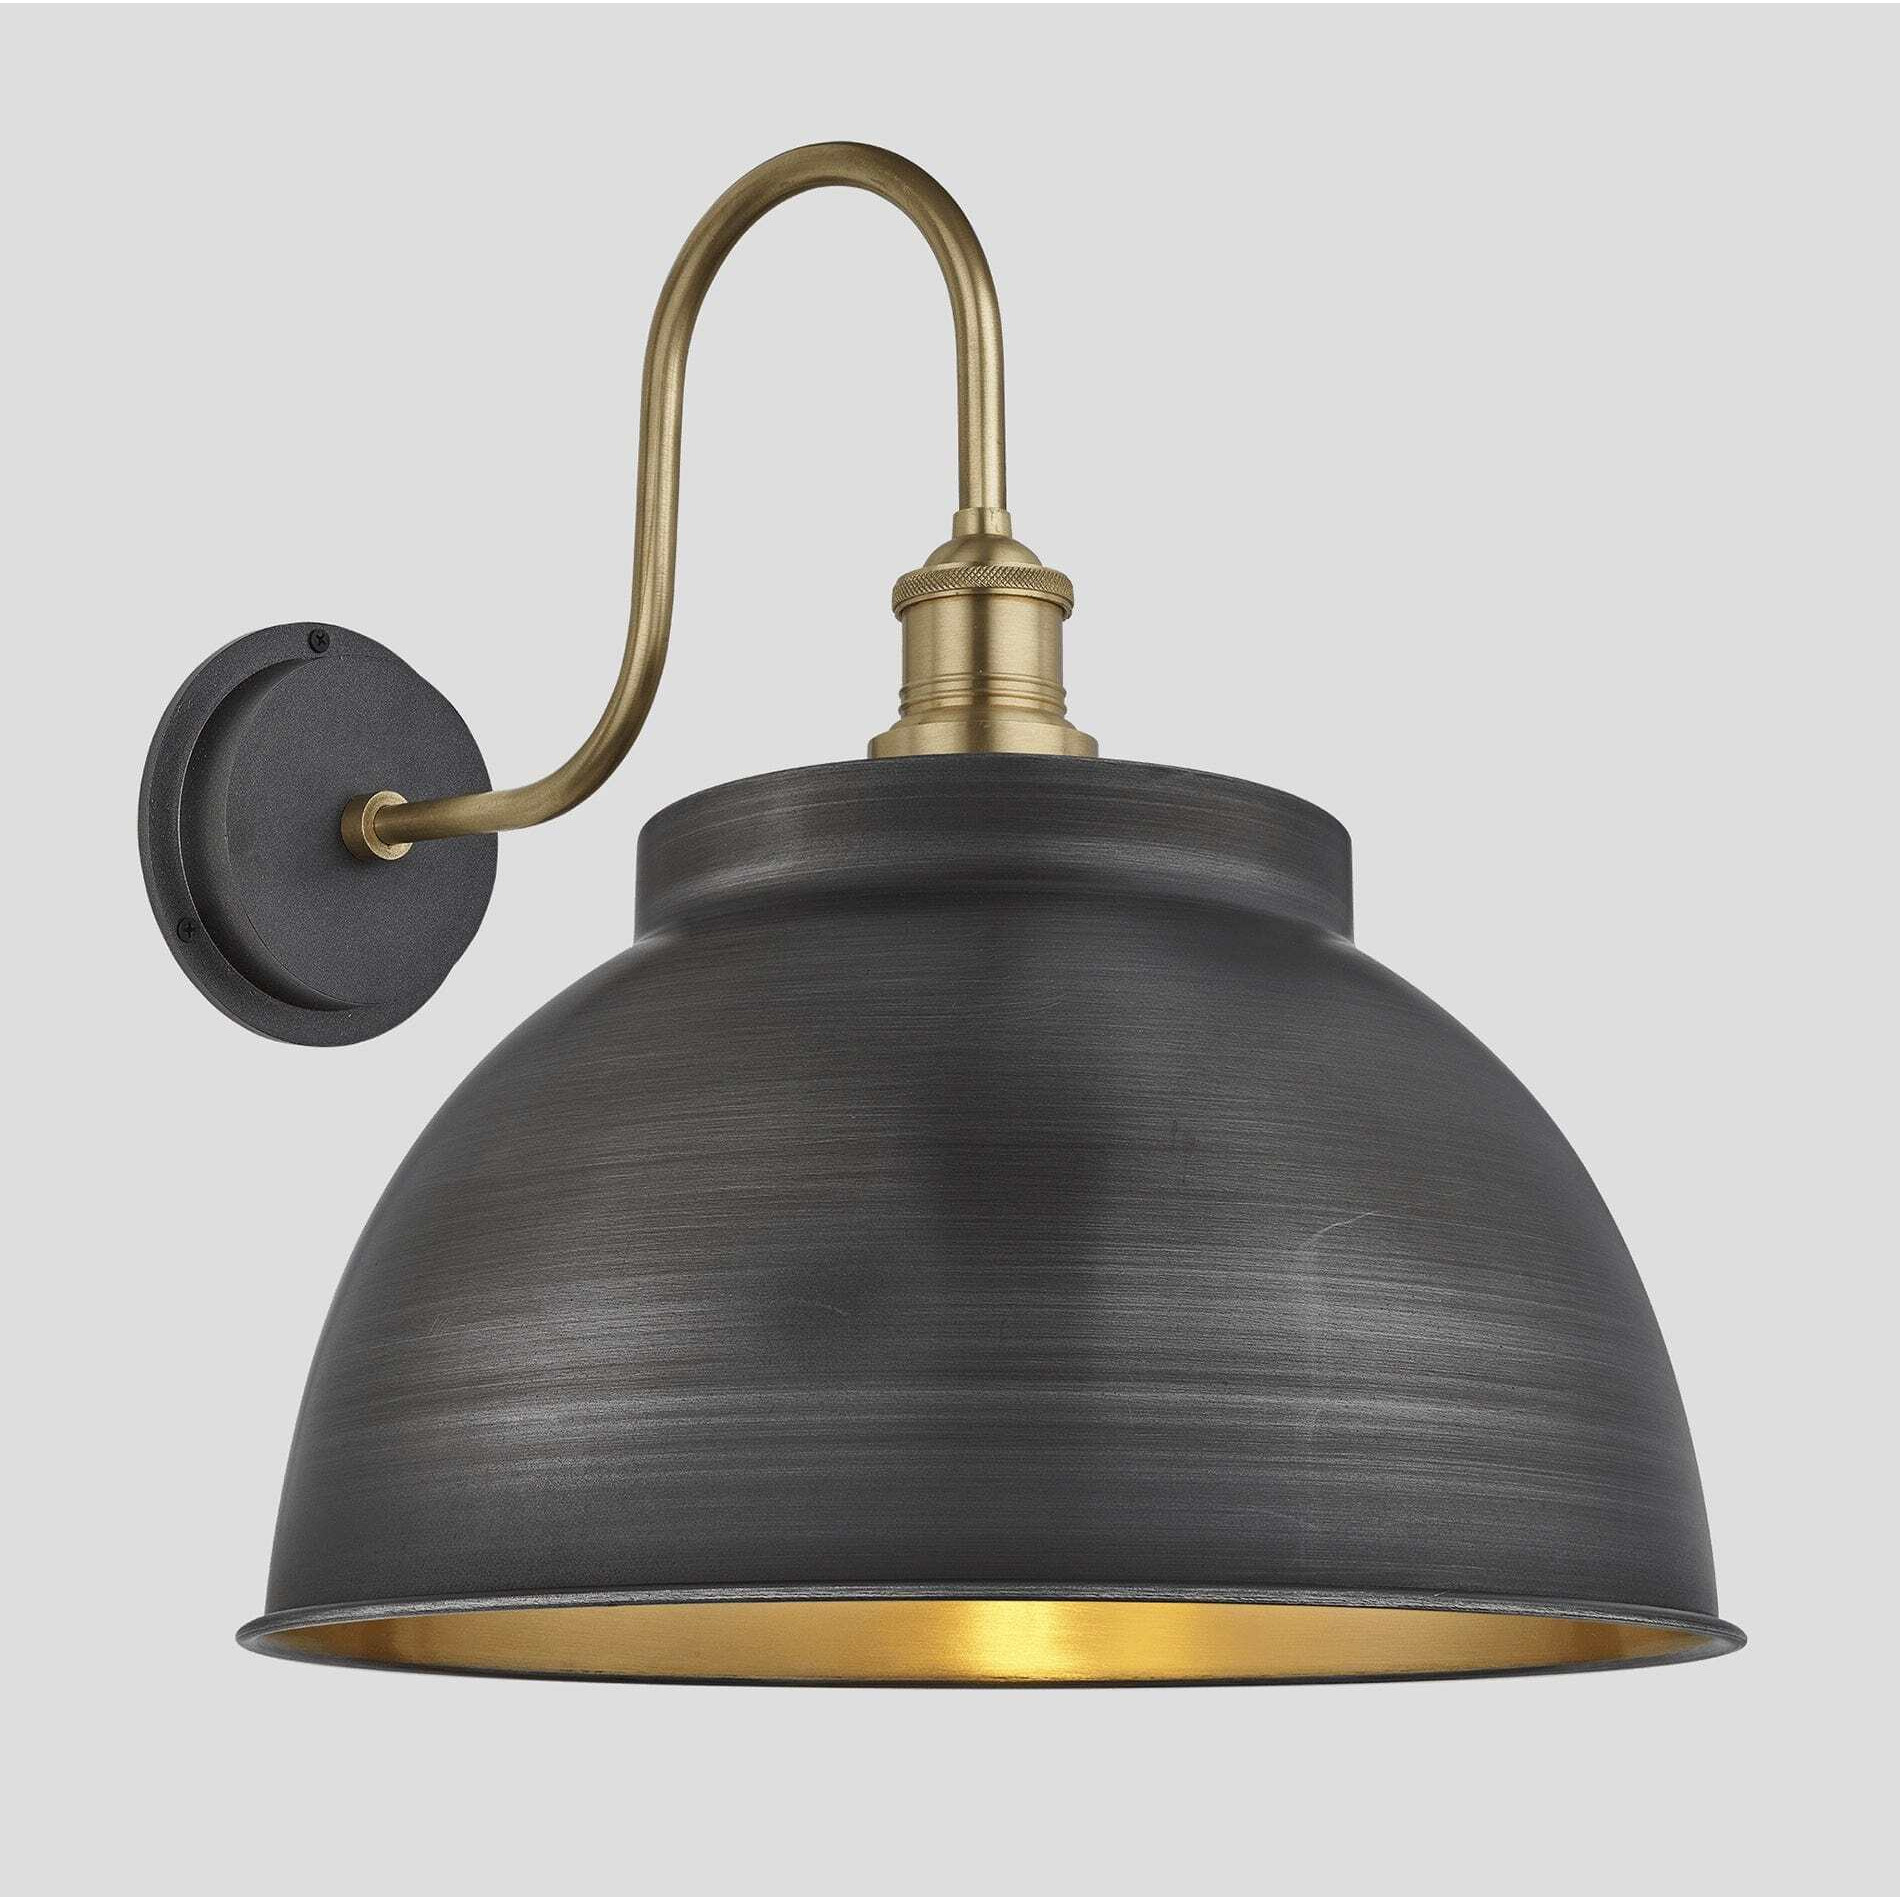 Swan Neck Outdoor & Bathroom Dome Wall Light - 17 Inch - Pewter & Brass - Pre-order - Expected w/c 20th of May